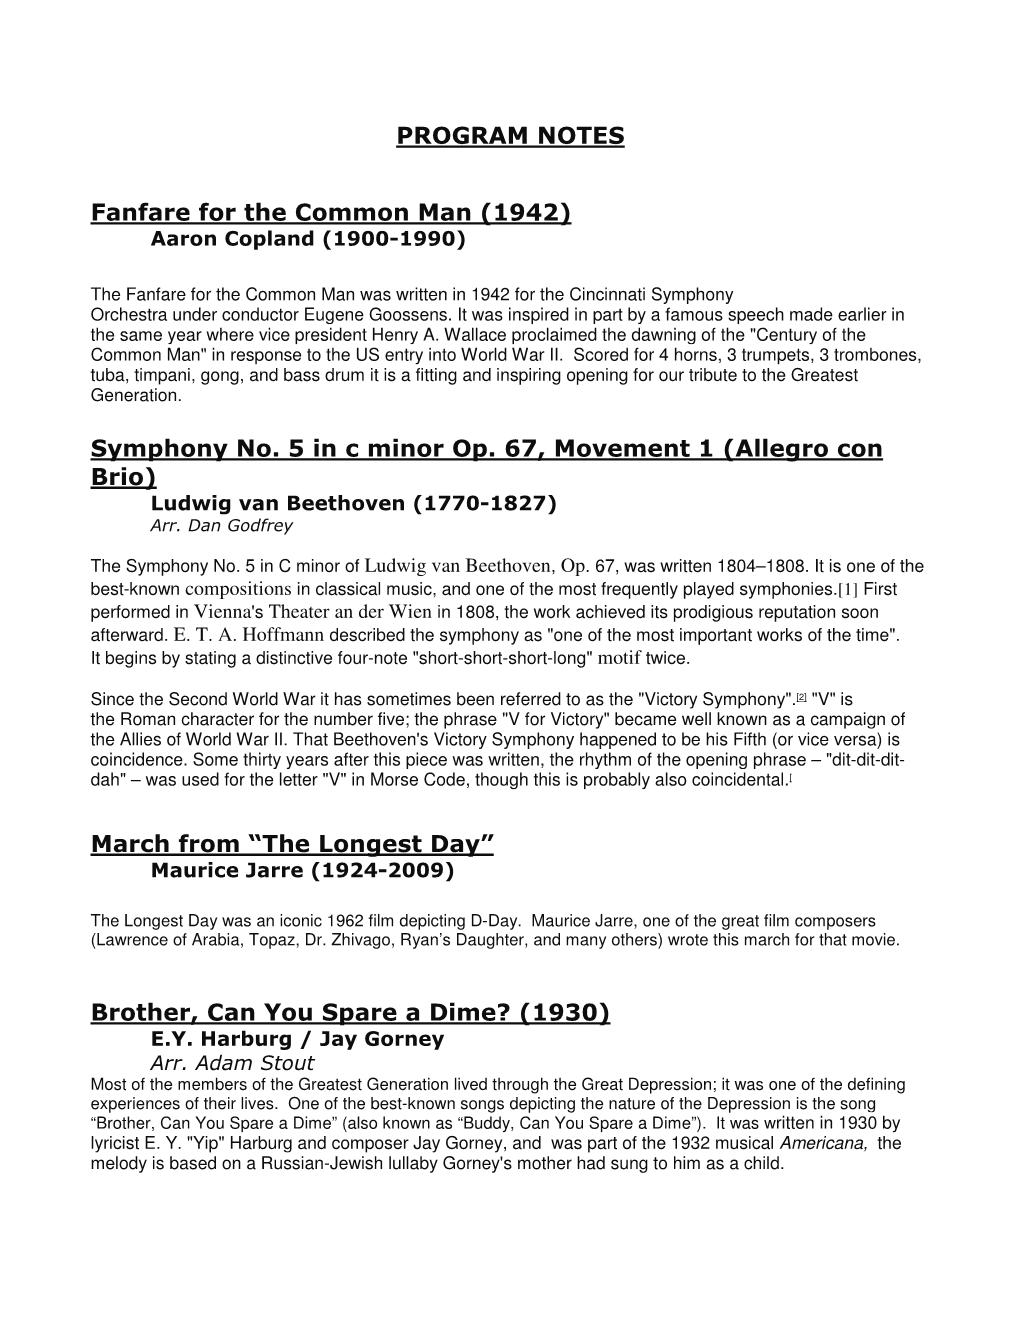 PROGRAM NOTES Fanfare for the Common